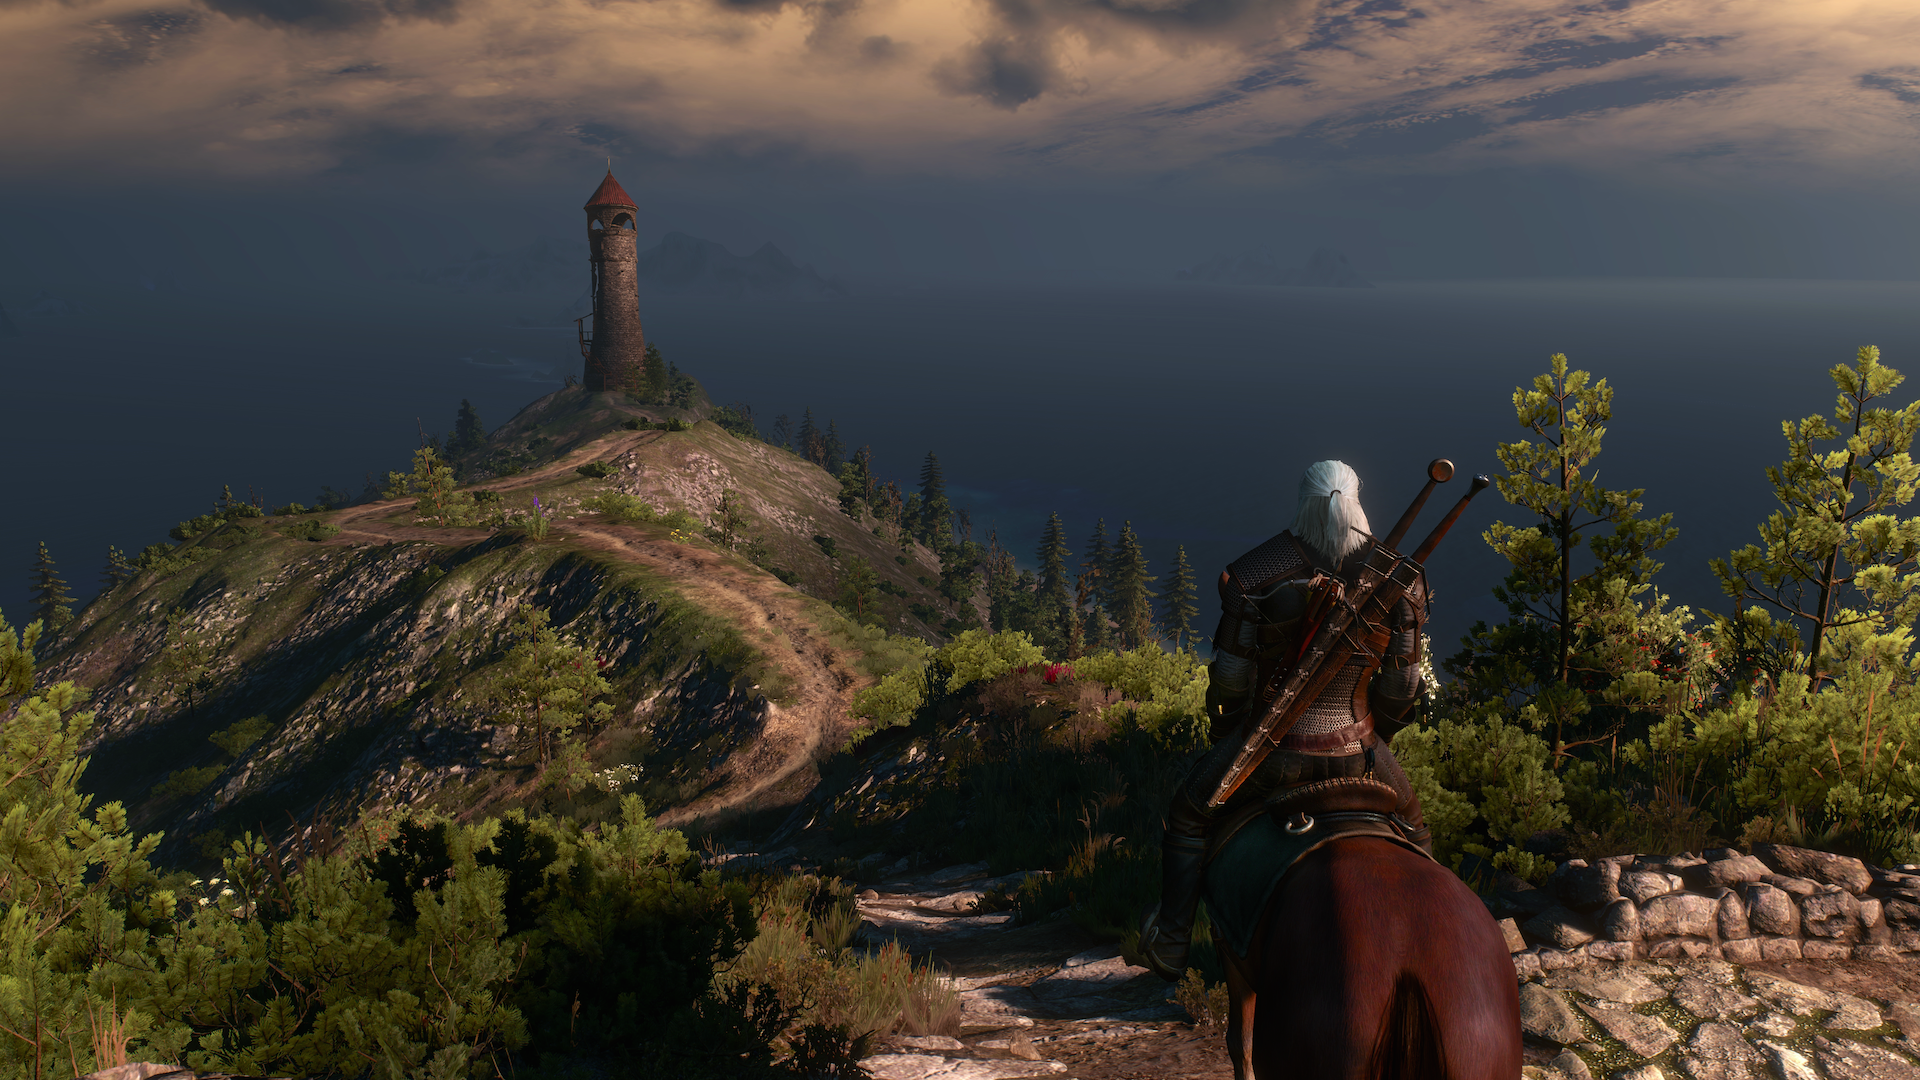 The Witcher 3 - 4